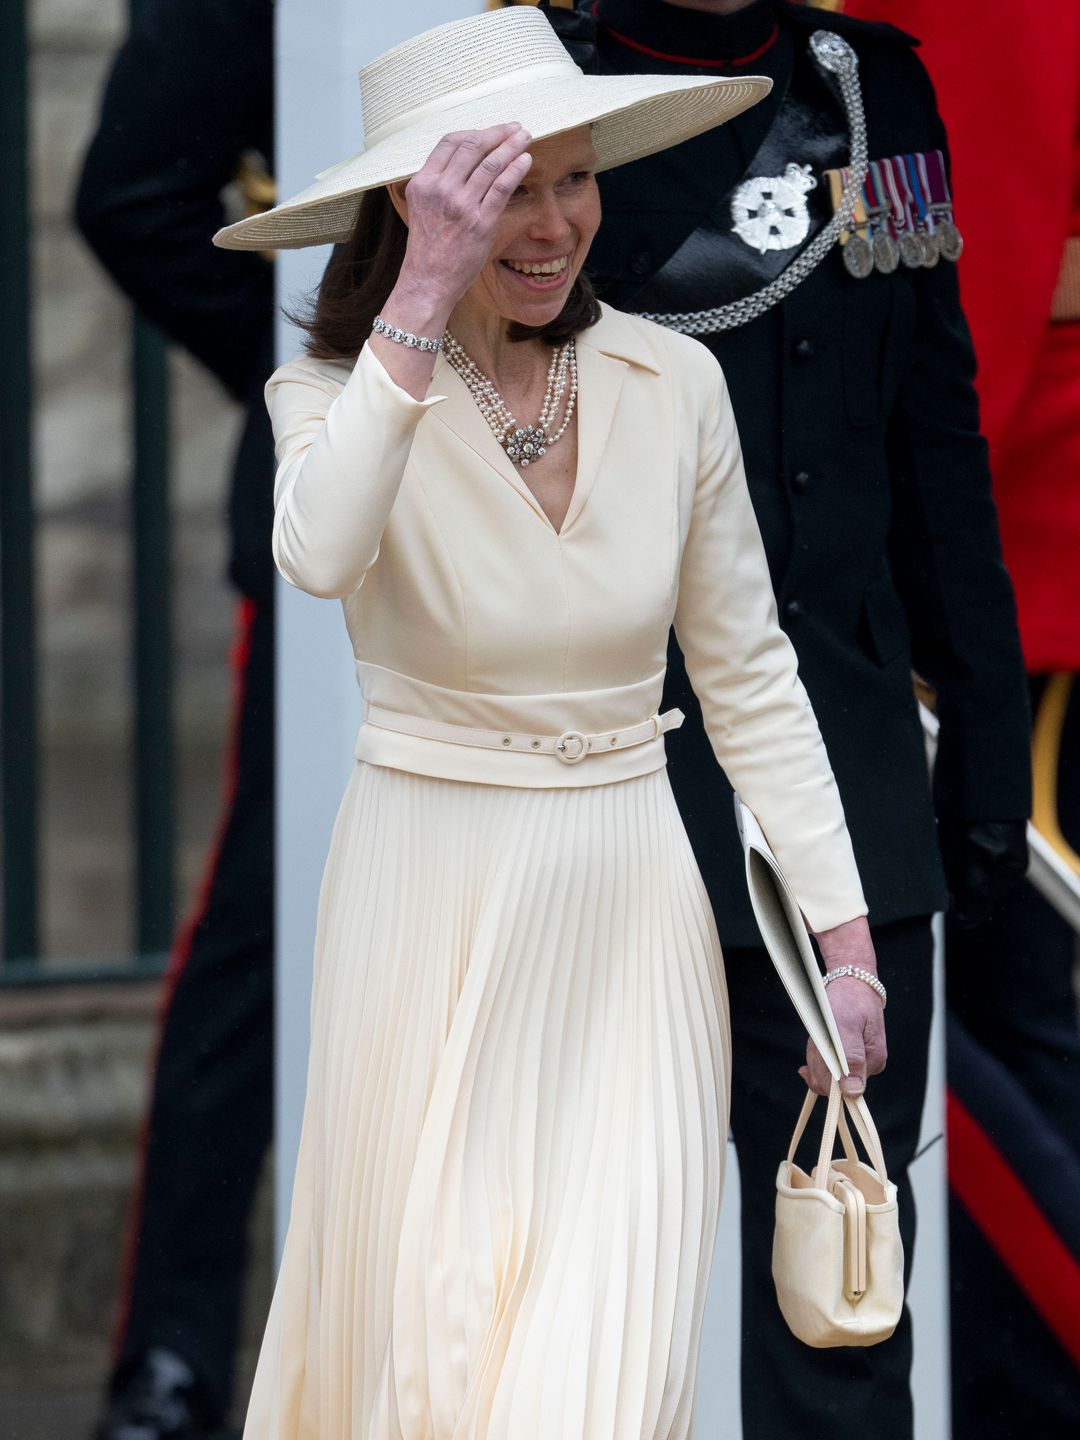 LONDON, ENGLAND - MAY 6: Lady Sarah Chatto at Westminster Abbey during the Coronation of King Charles III and Queen Camilla on May 6, 2023 in London, England. The Coronation of Charles III and his wife, Camilla, as King and Queen of the United Kingdom of 